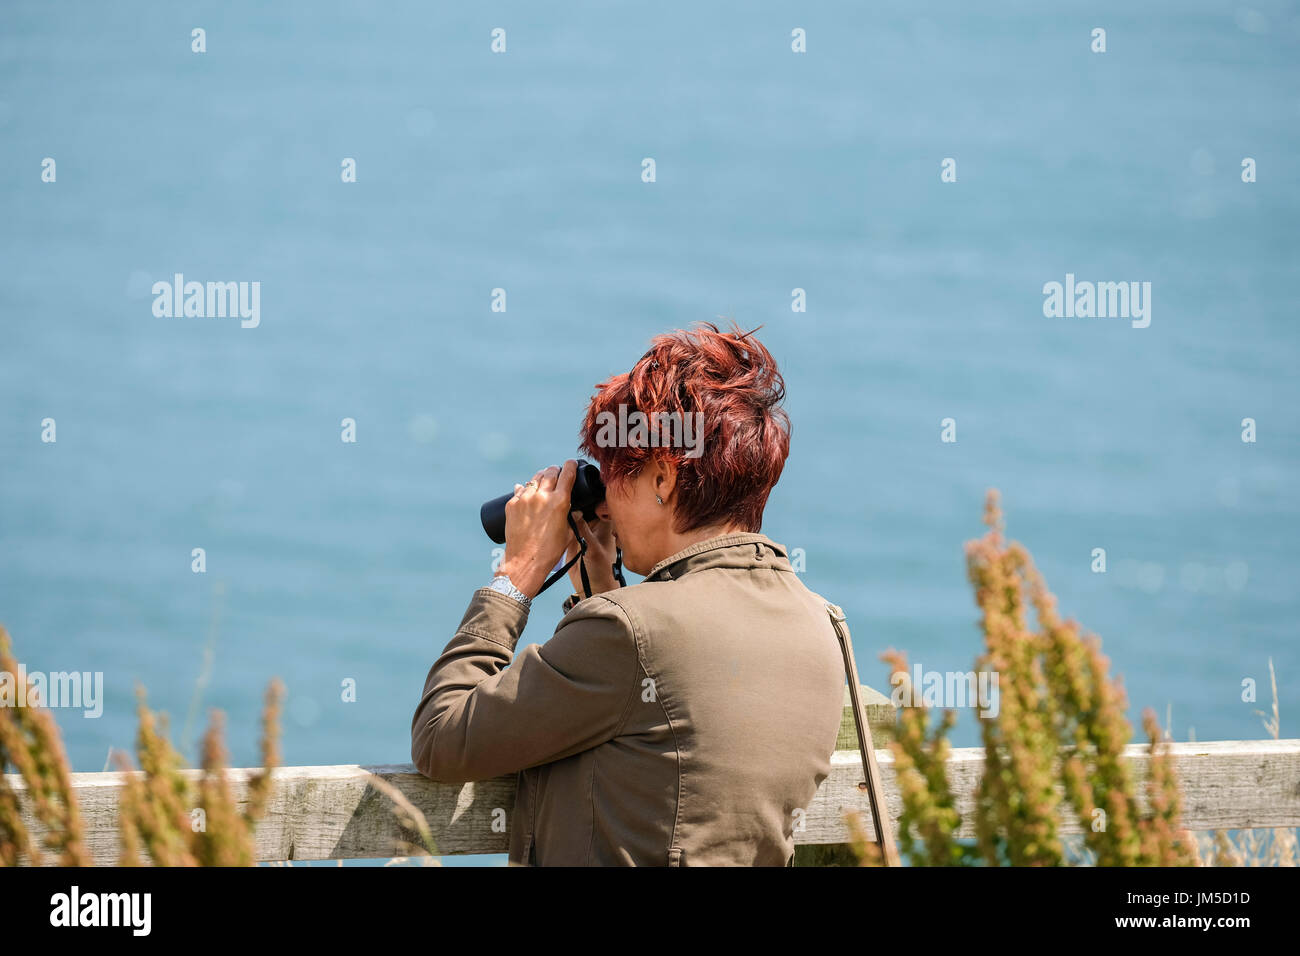 A woman female bird watching with binoculars at a viewpoint on Bempton Cliffs RSPB Reserve, UK. Stock Photo